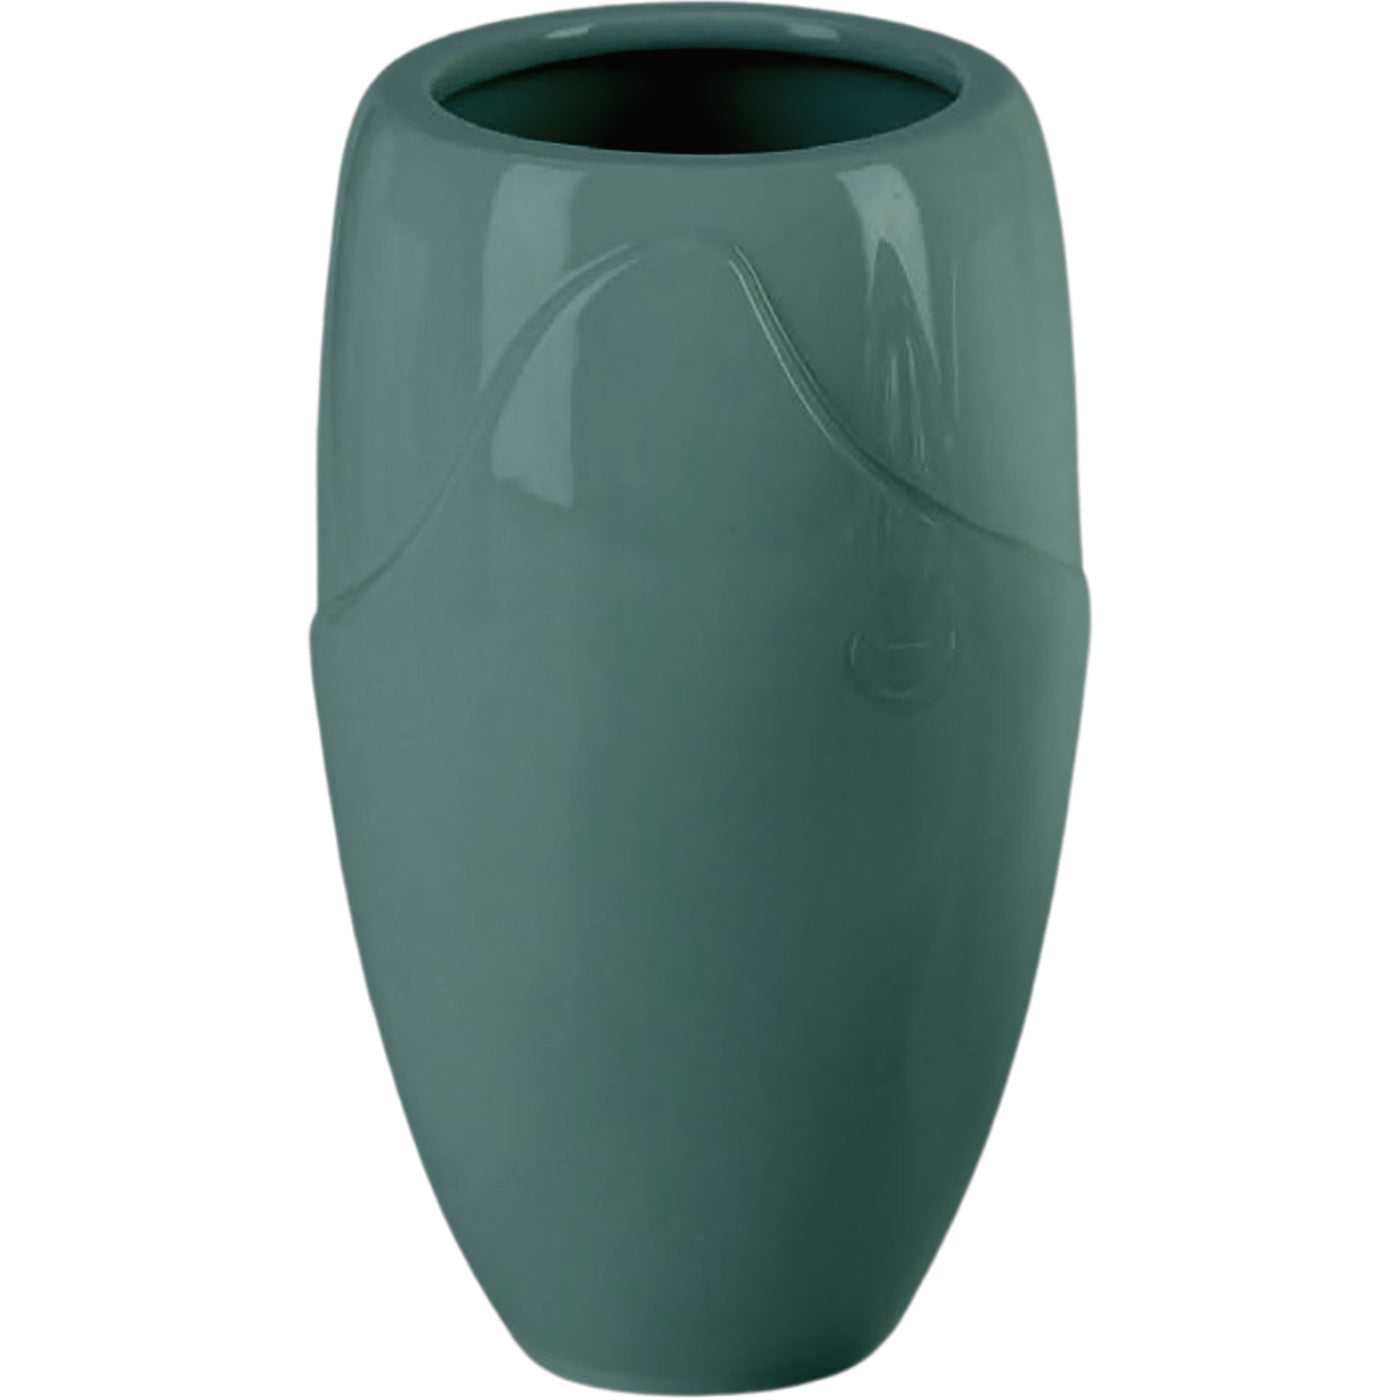 Grave vases Onda green 21x13cm - 8.3x5.1in In green porcelain, ground attached ON168T/V